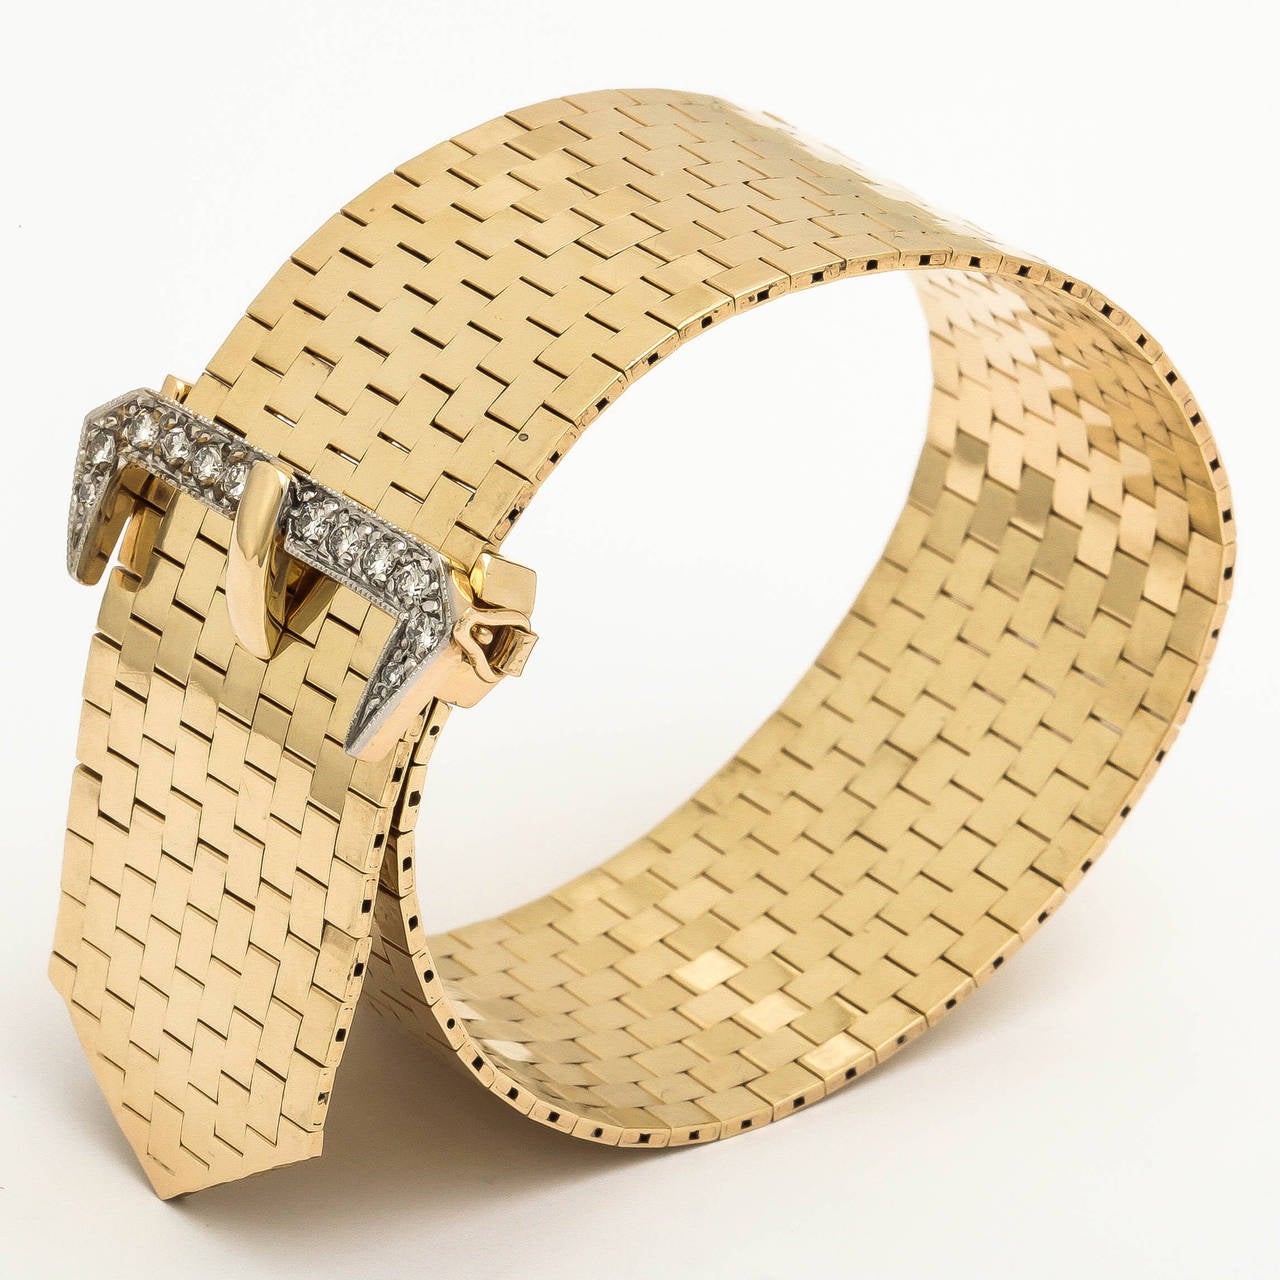 One 14kt yellow gold brick mesh bracelet consisting of 12 brilliant cut  full cut diamonds with an approximate total weight of 1.00 ct beautifully designed bracelet crafted to look like a belt with the belt buckle in diamonds. This Bracelet Is